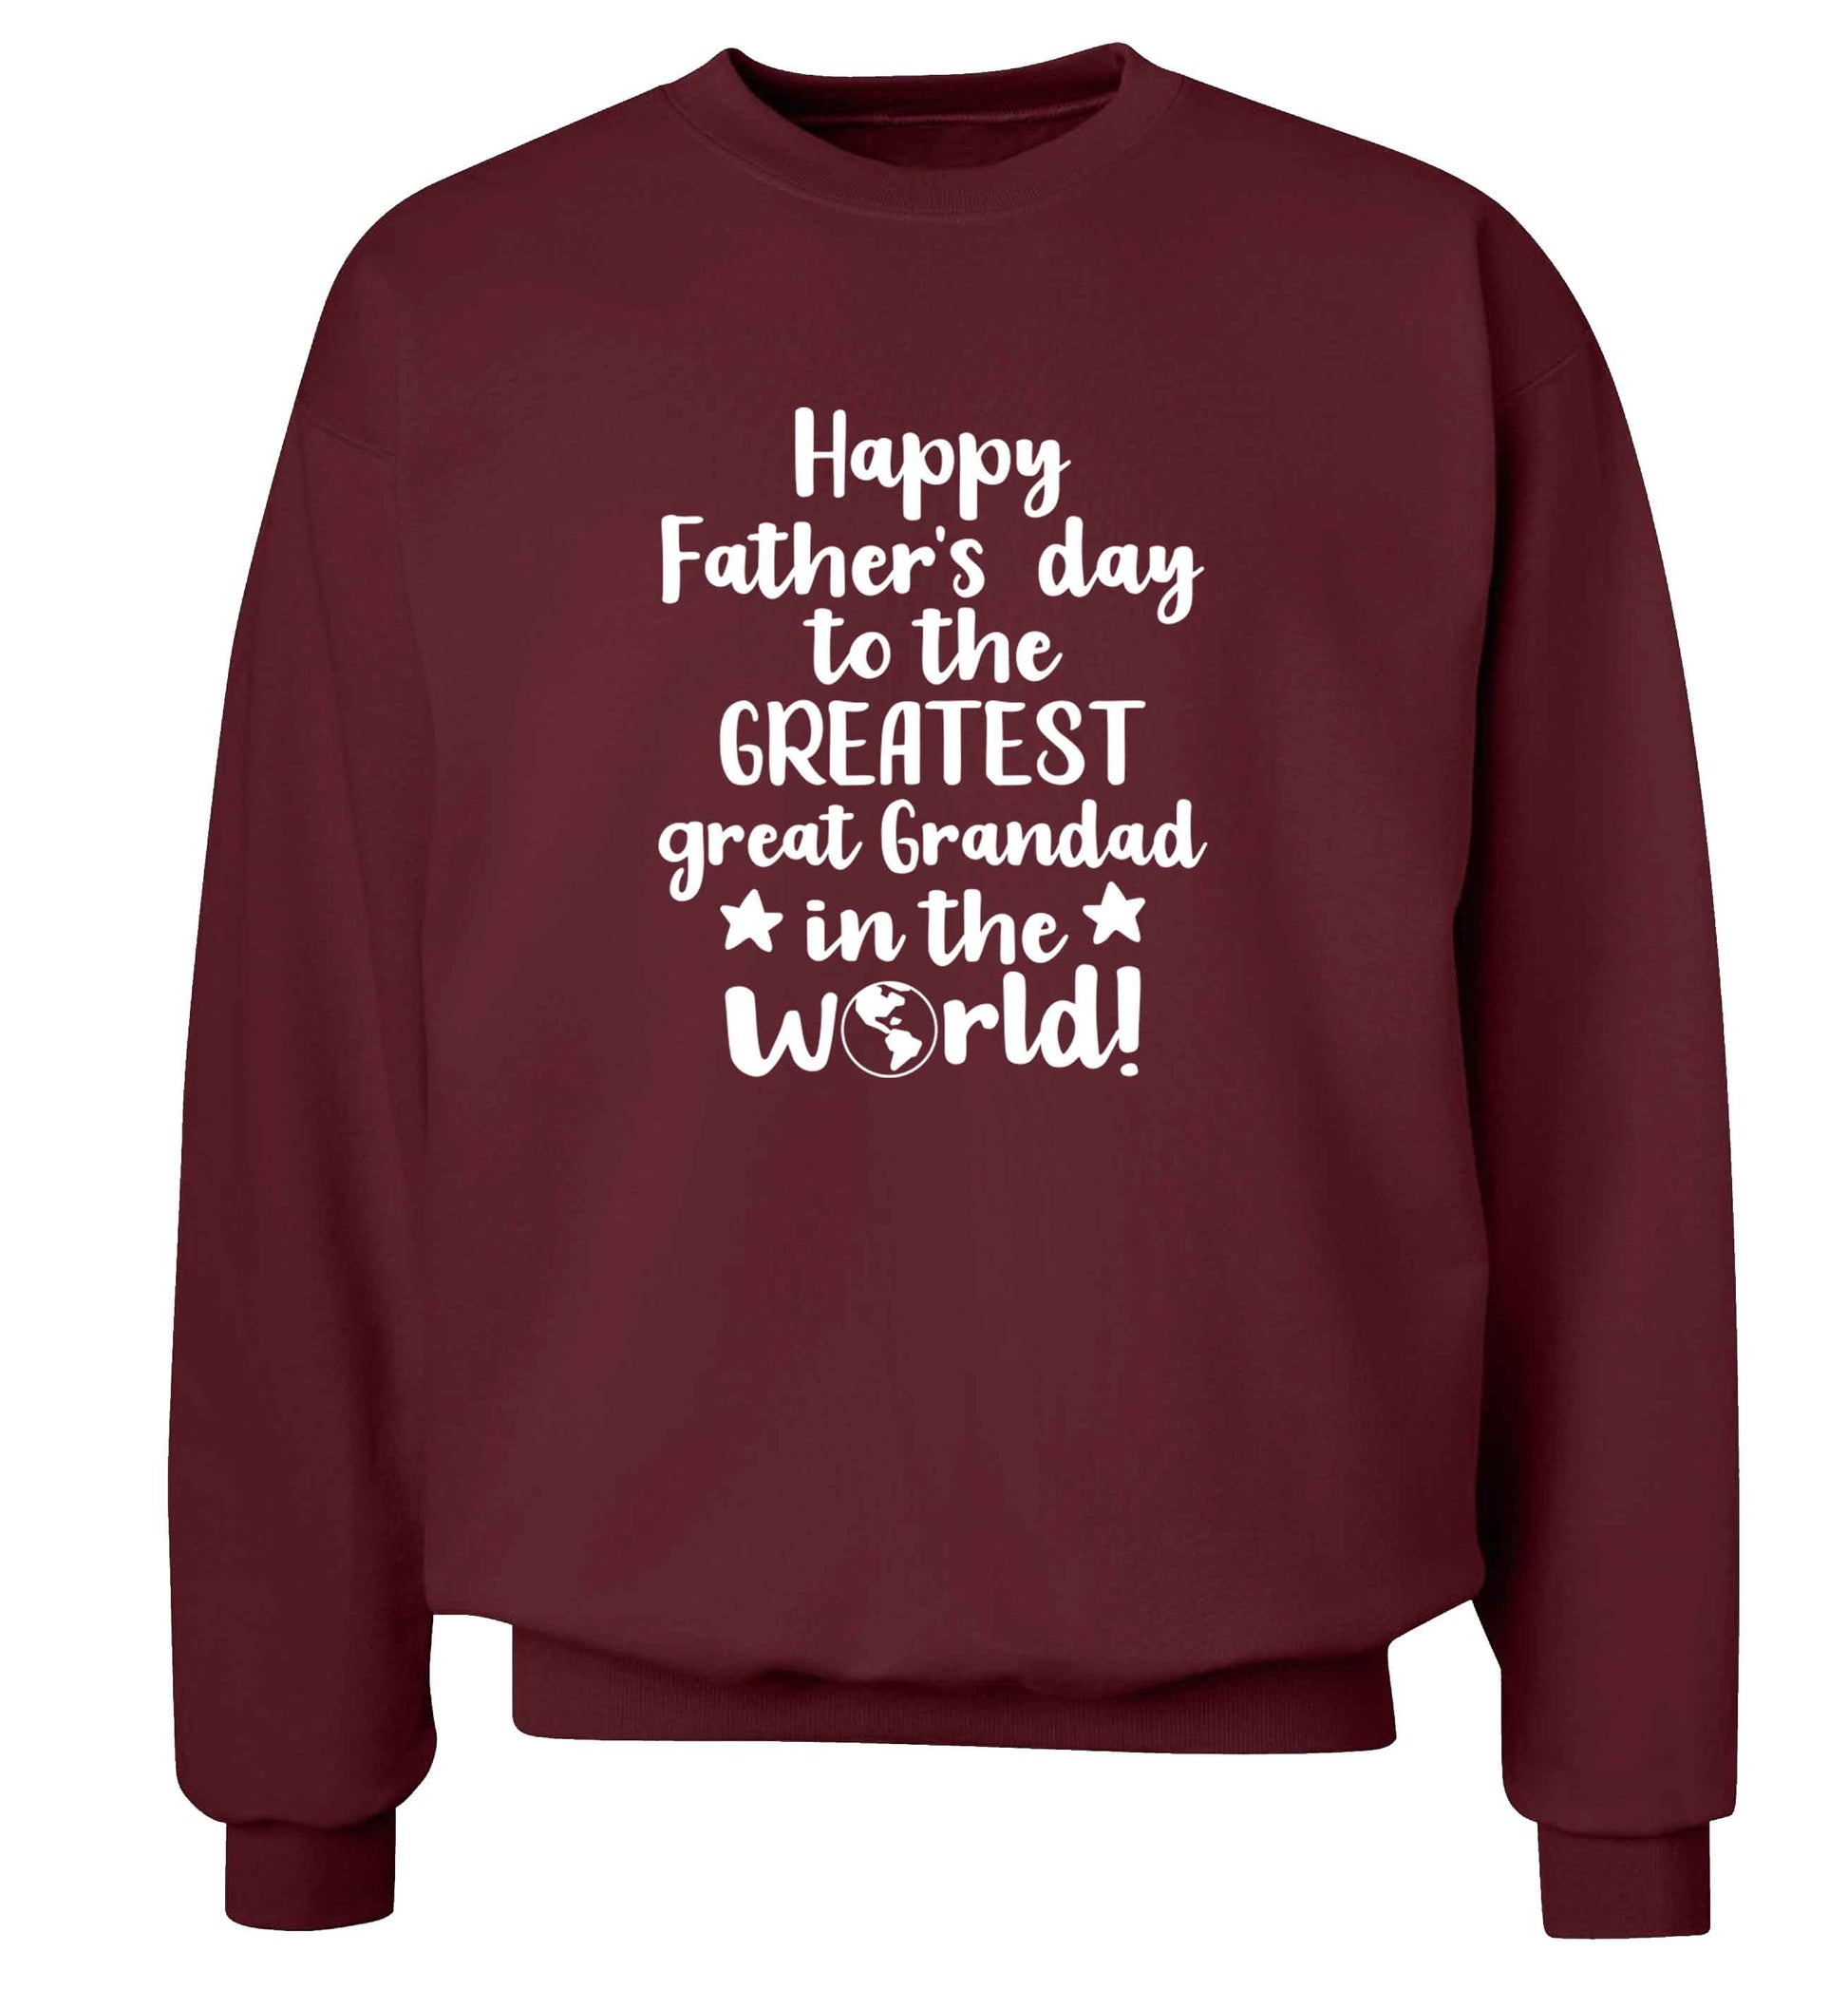 Happy Father's day to the greatest great grandad in the world adult's unisex maroon sweater 2XL